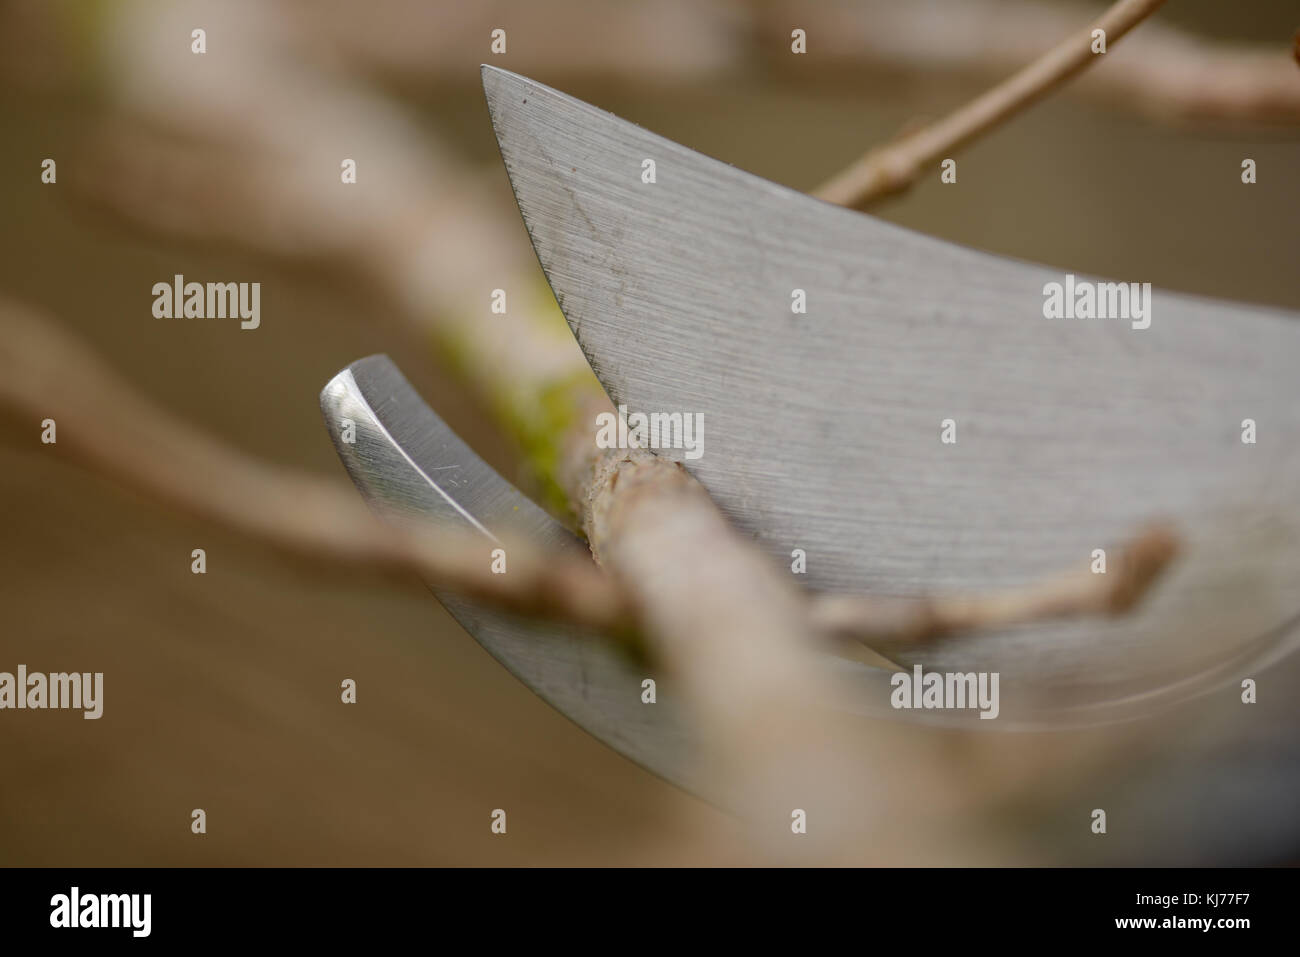 Detail of a pair of secateurs cutting a branch (with shallow depth of field) Stock Photo